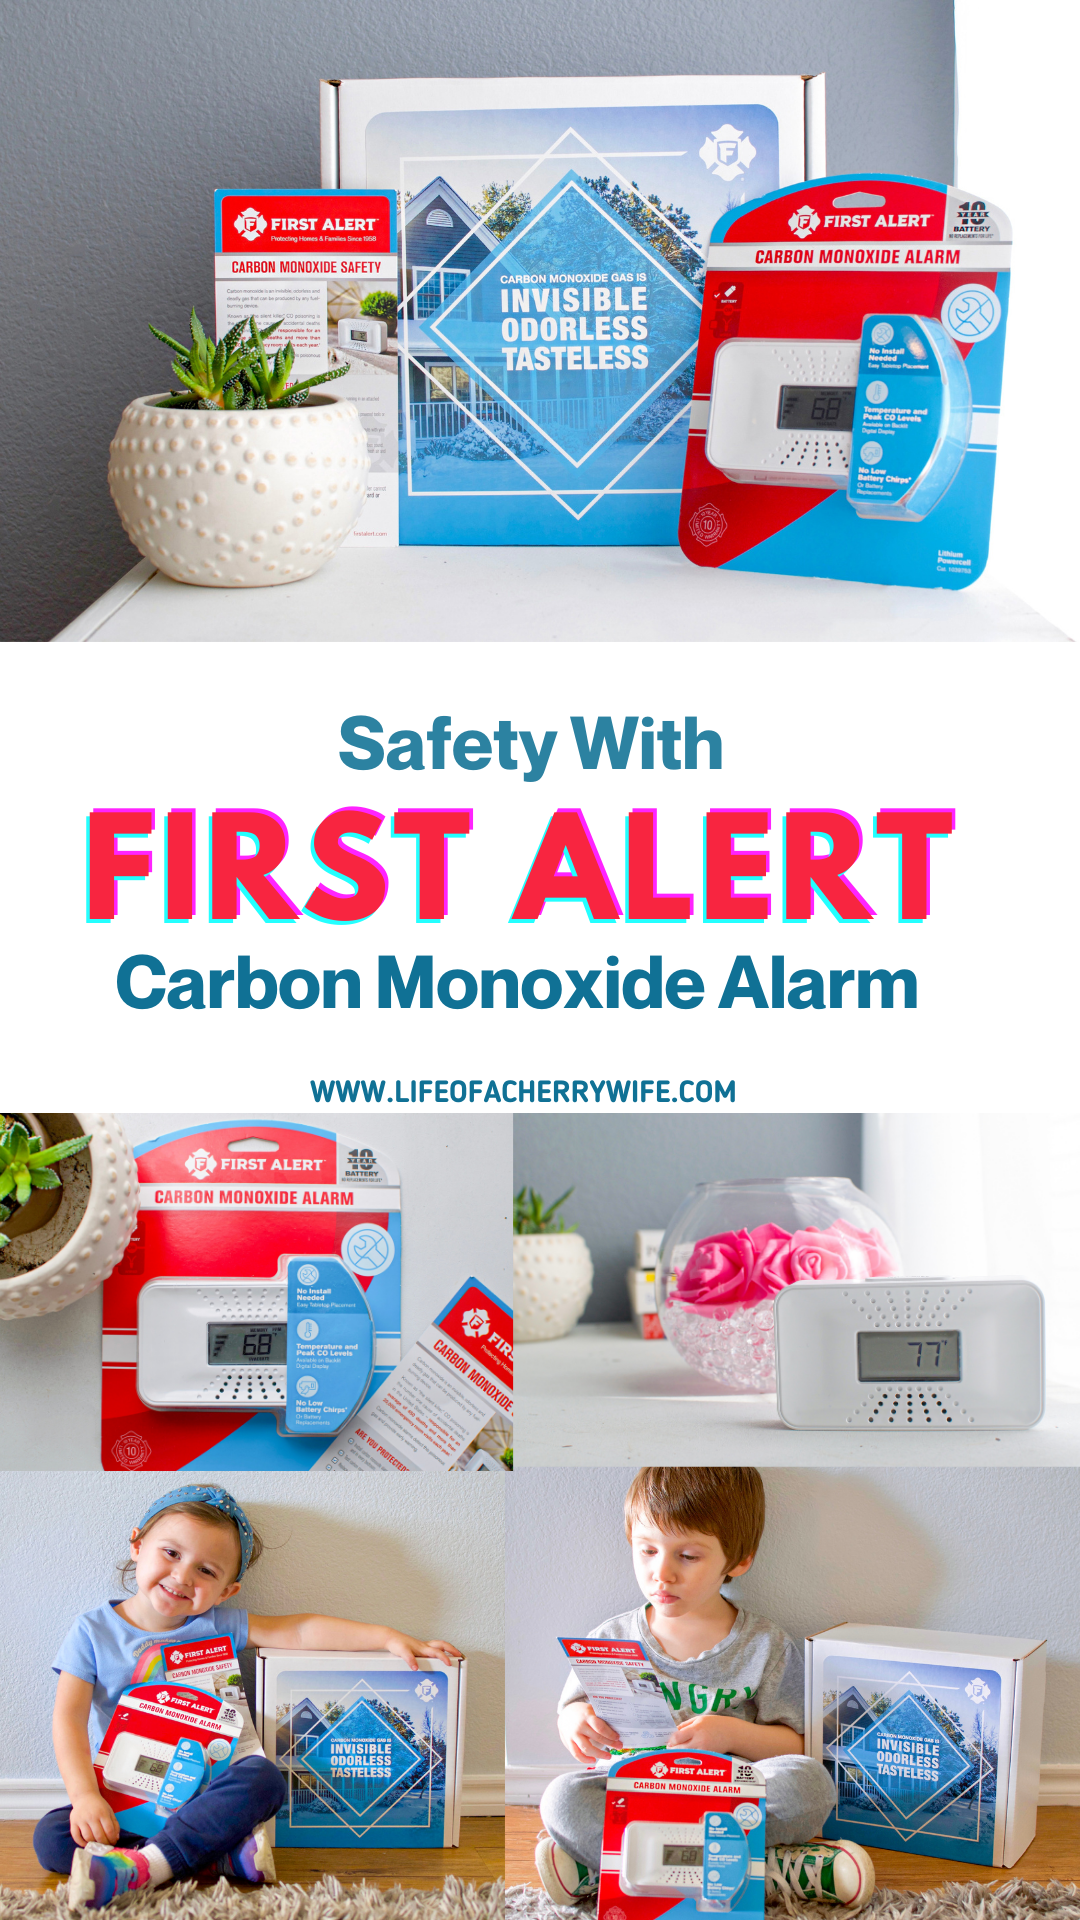 Safety with First Alert Alarm. Protect your loved ones from CO posioning